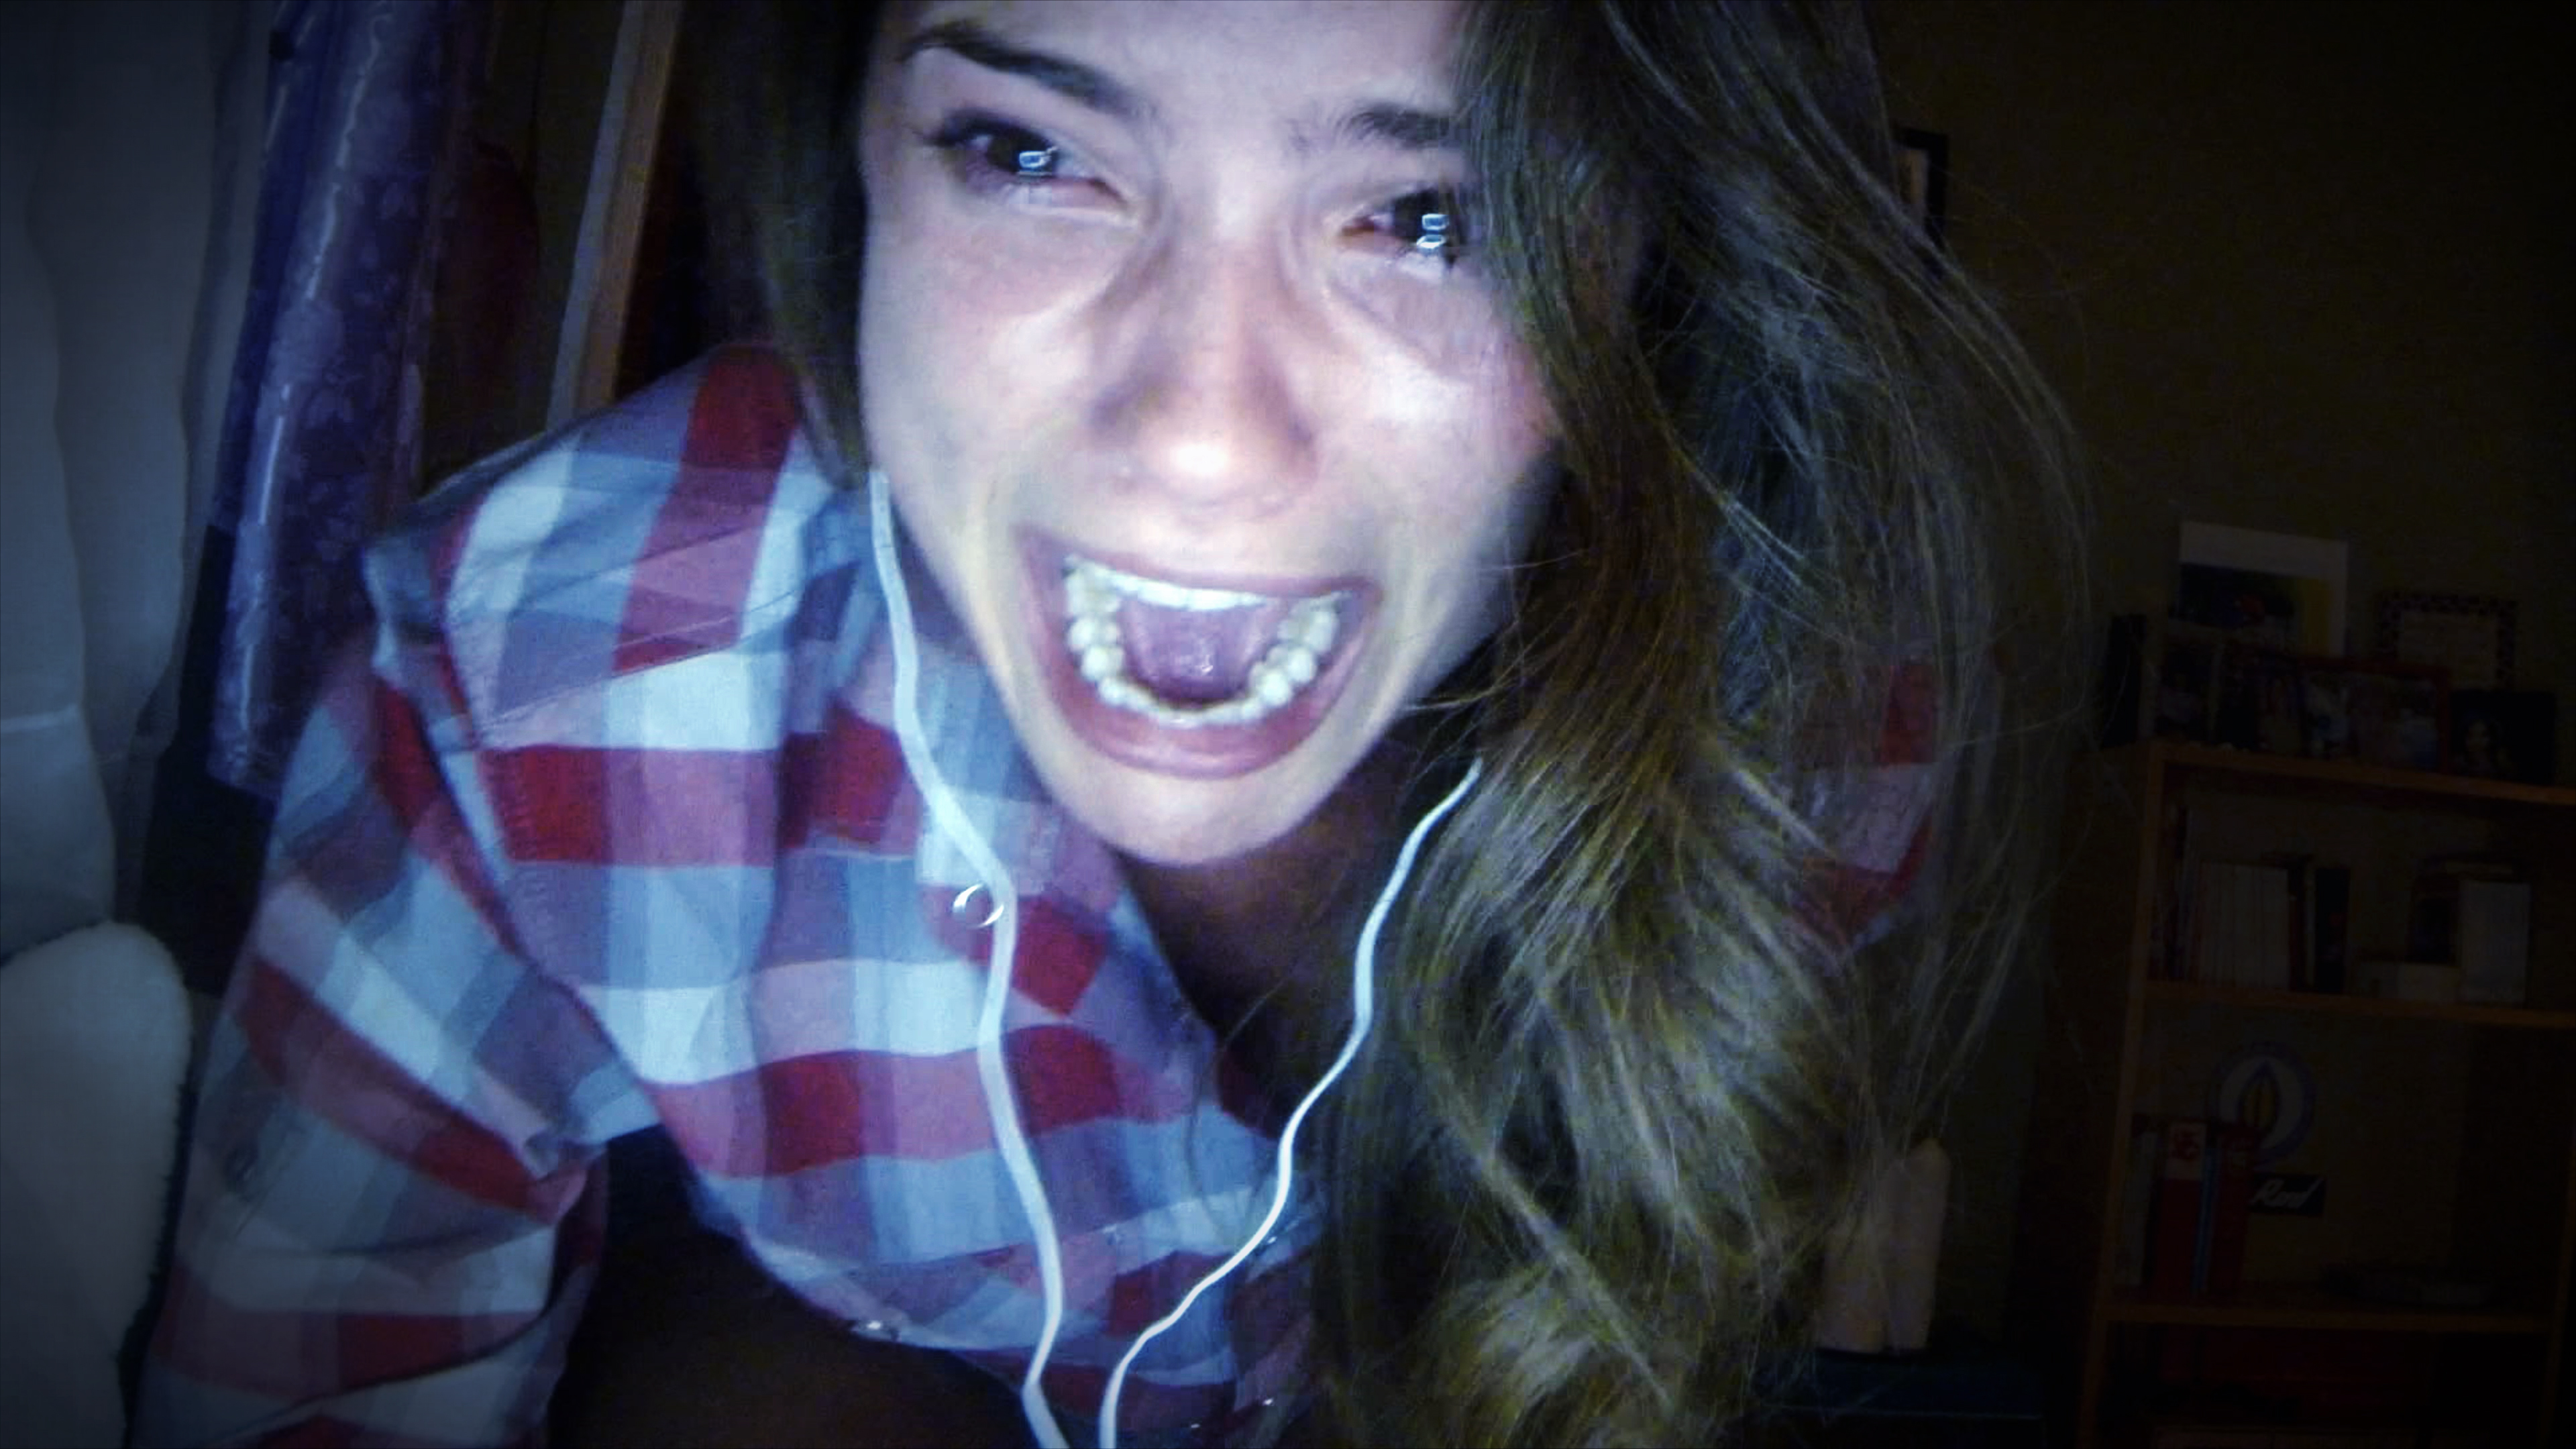 Unfriended (image source: Universal)